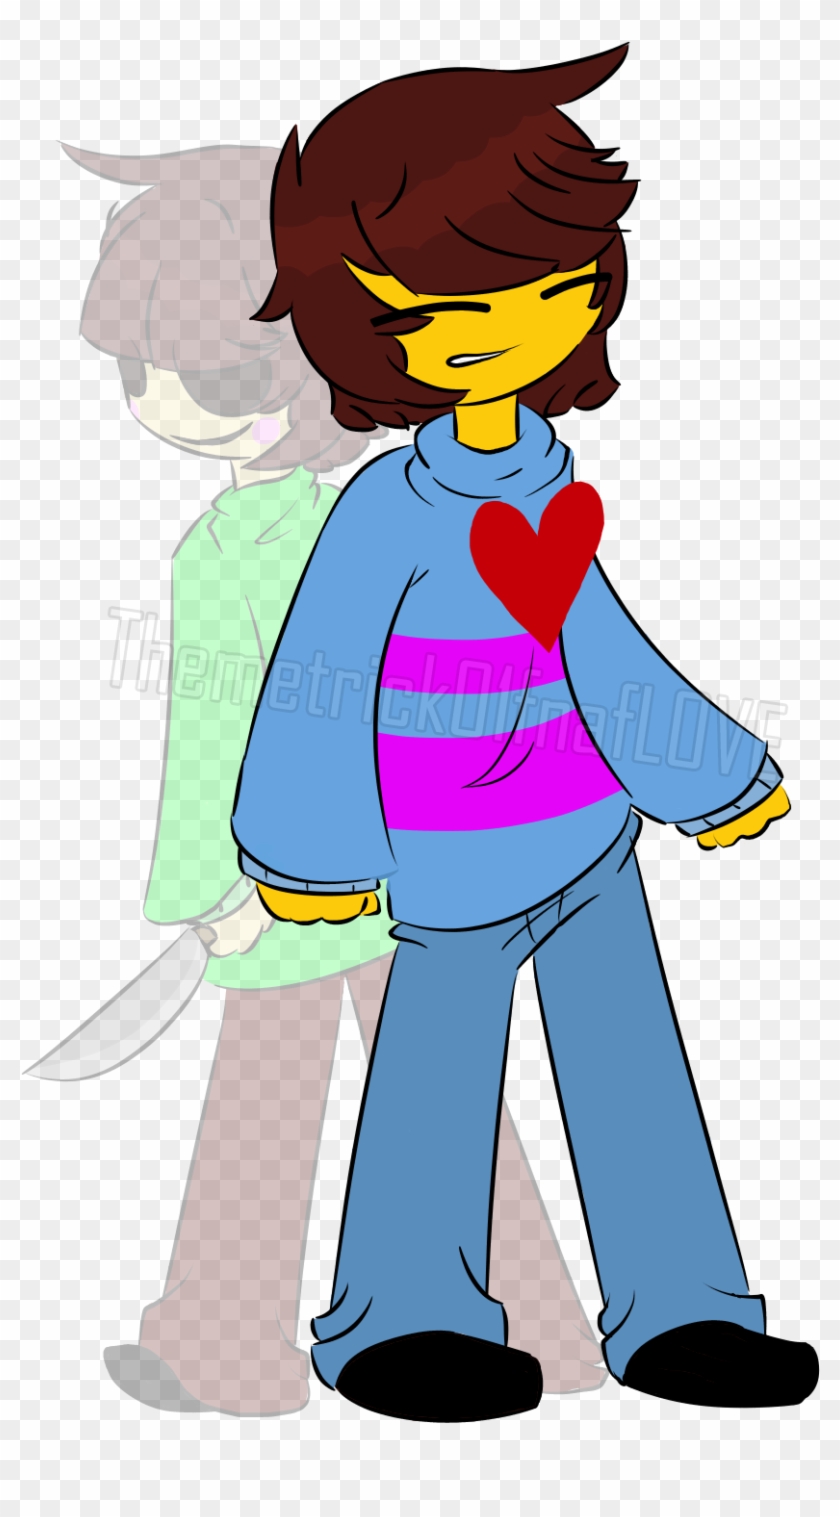 Themetrick01fnaflove 24 11 Frisk And Chara - Frisk And Chara Undertale Drawing #452258